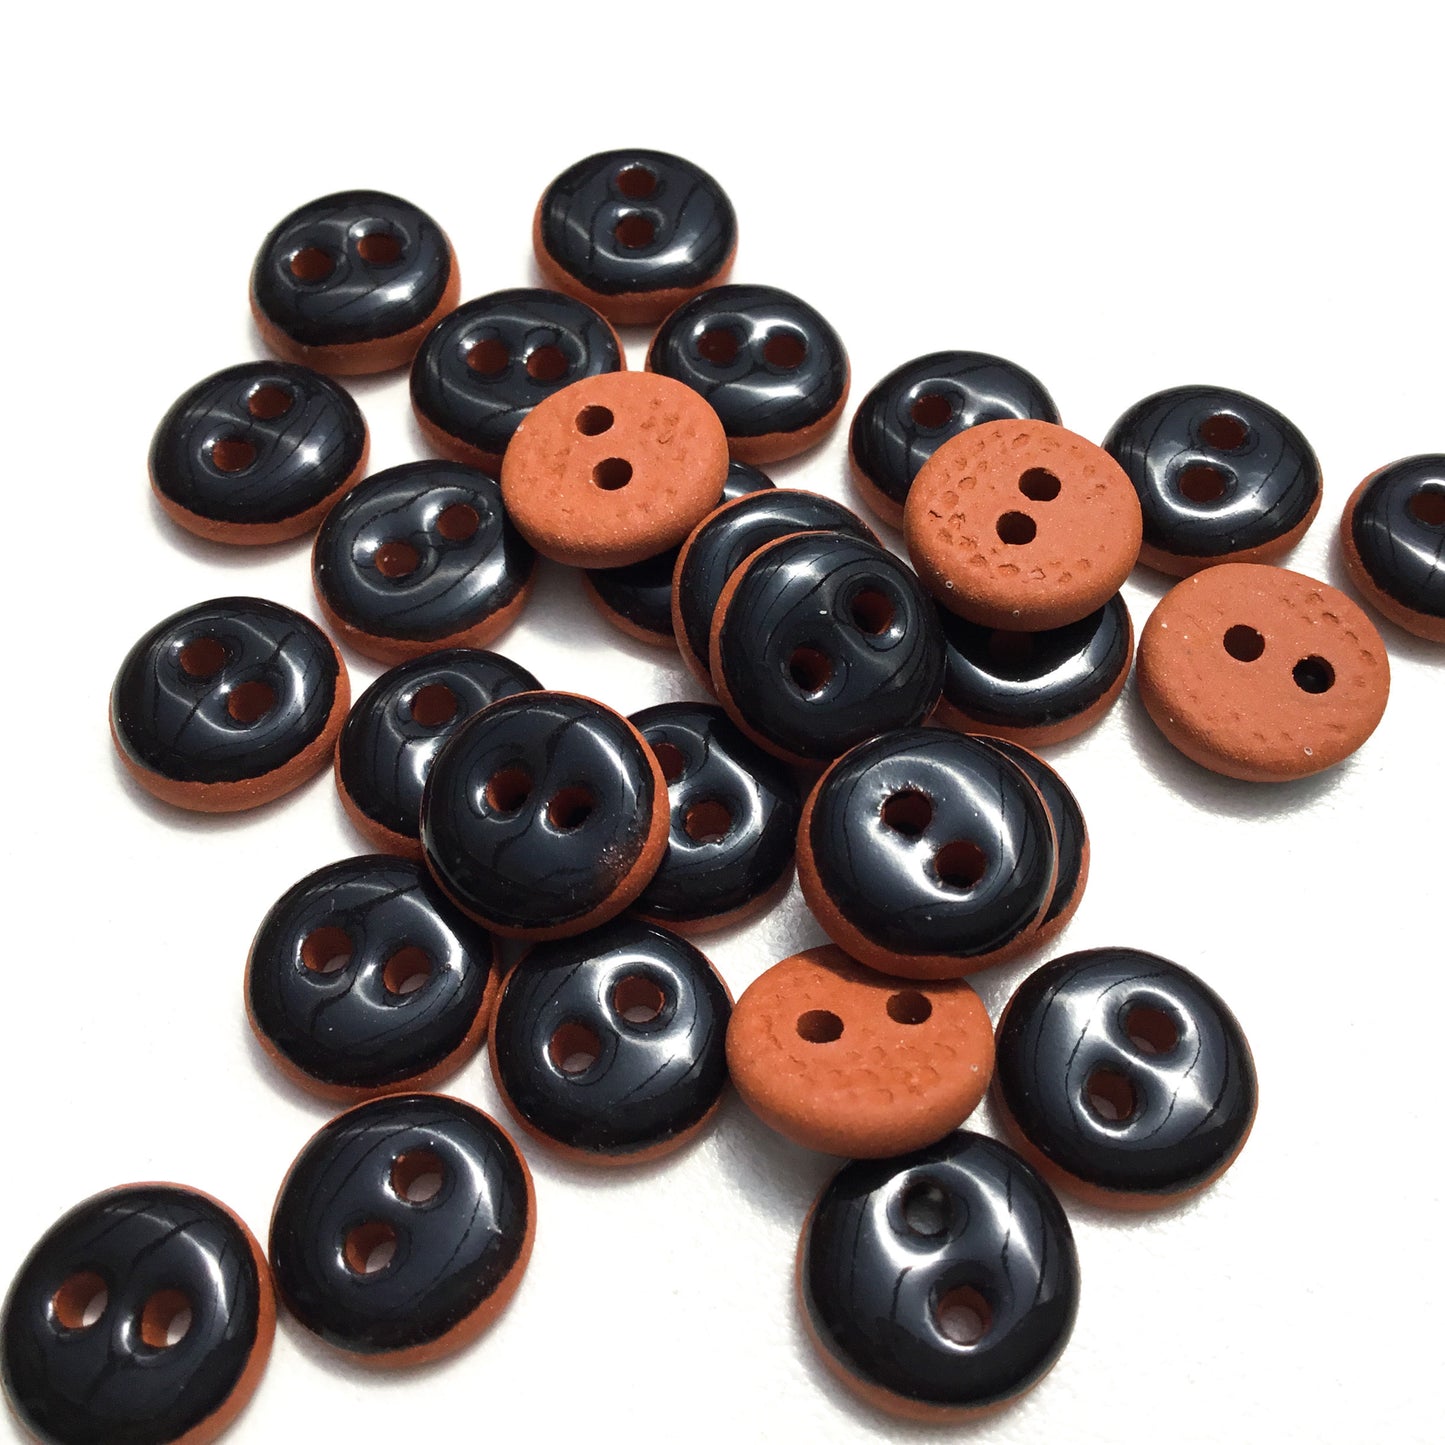 Black Ceramic Buttons on Red Clay - 7/16"